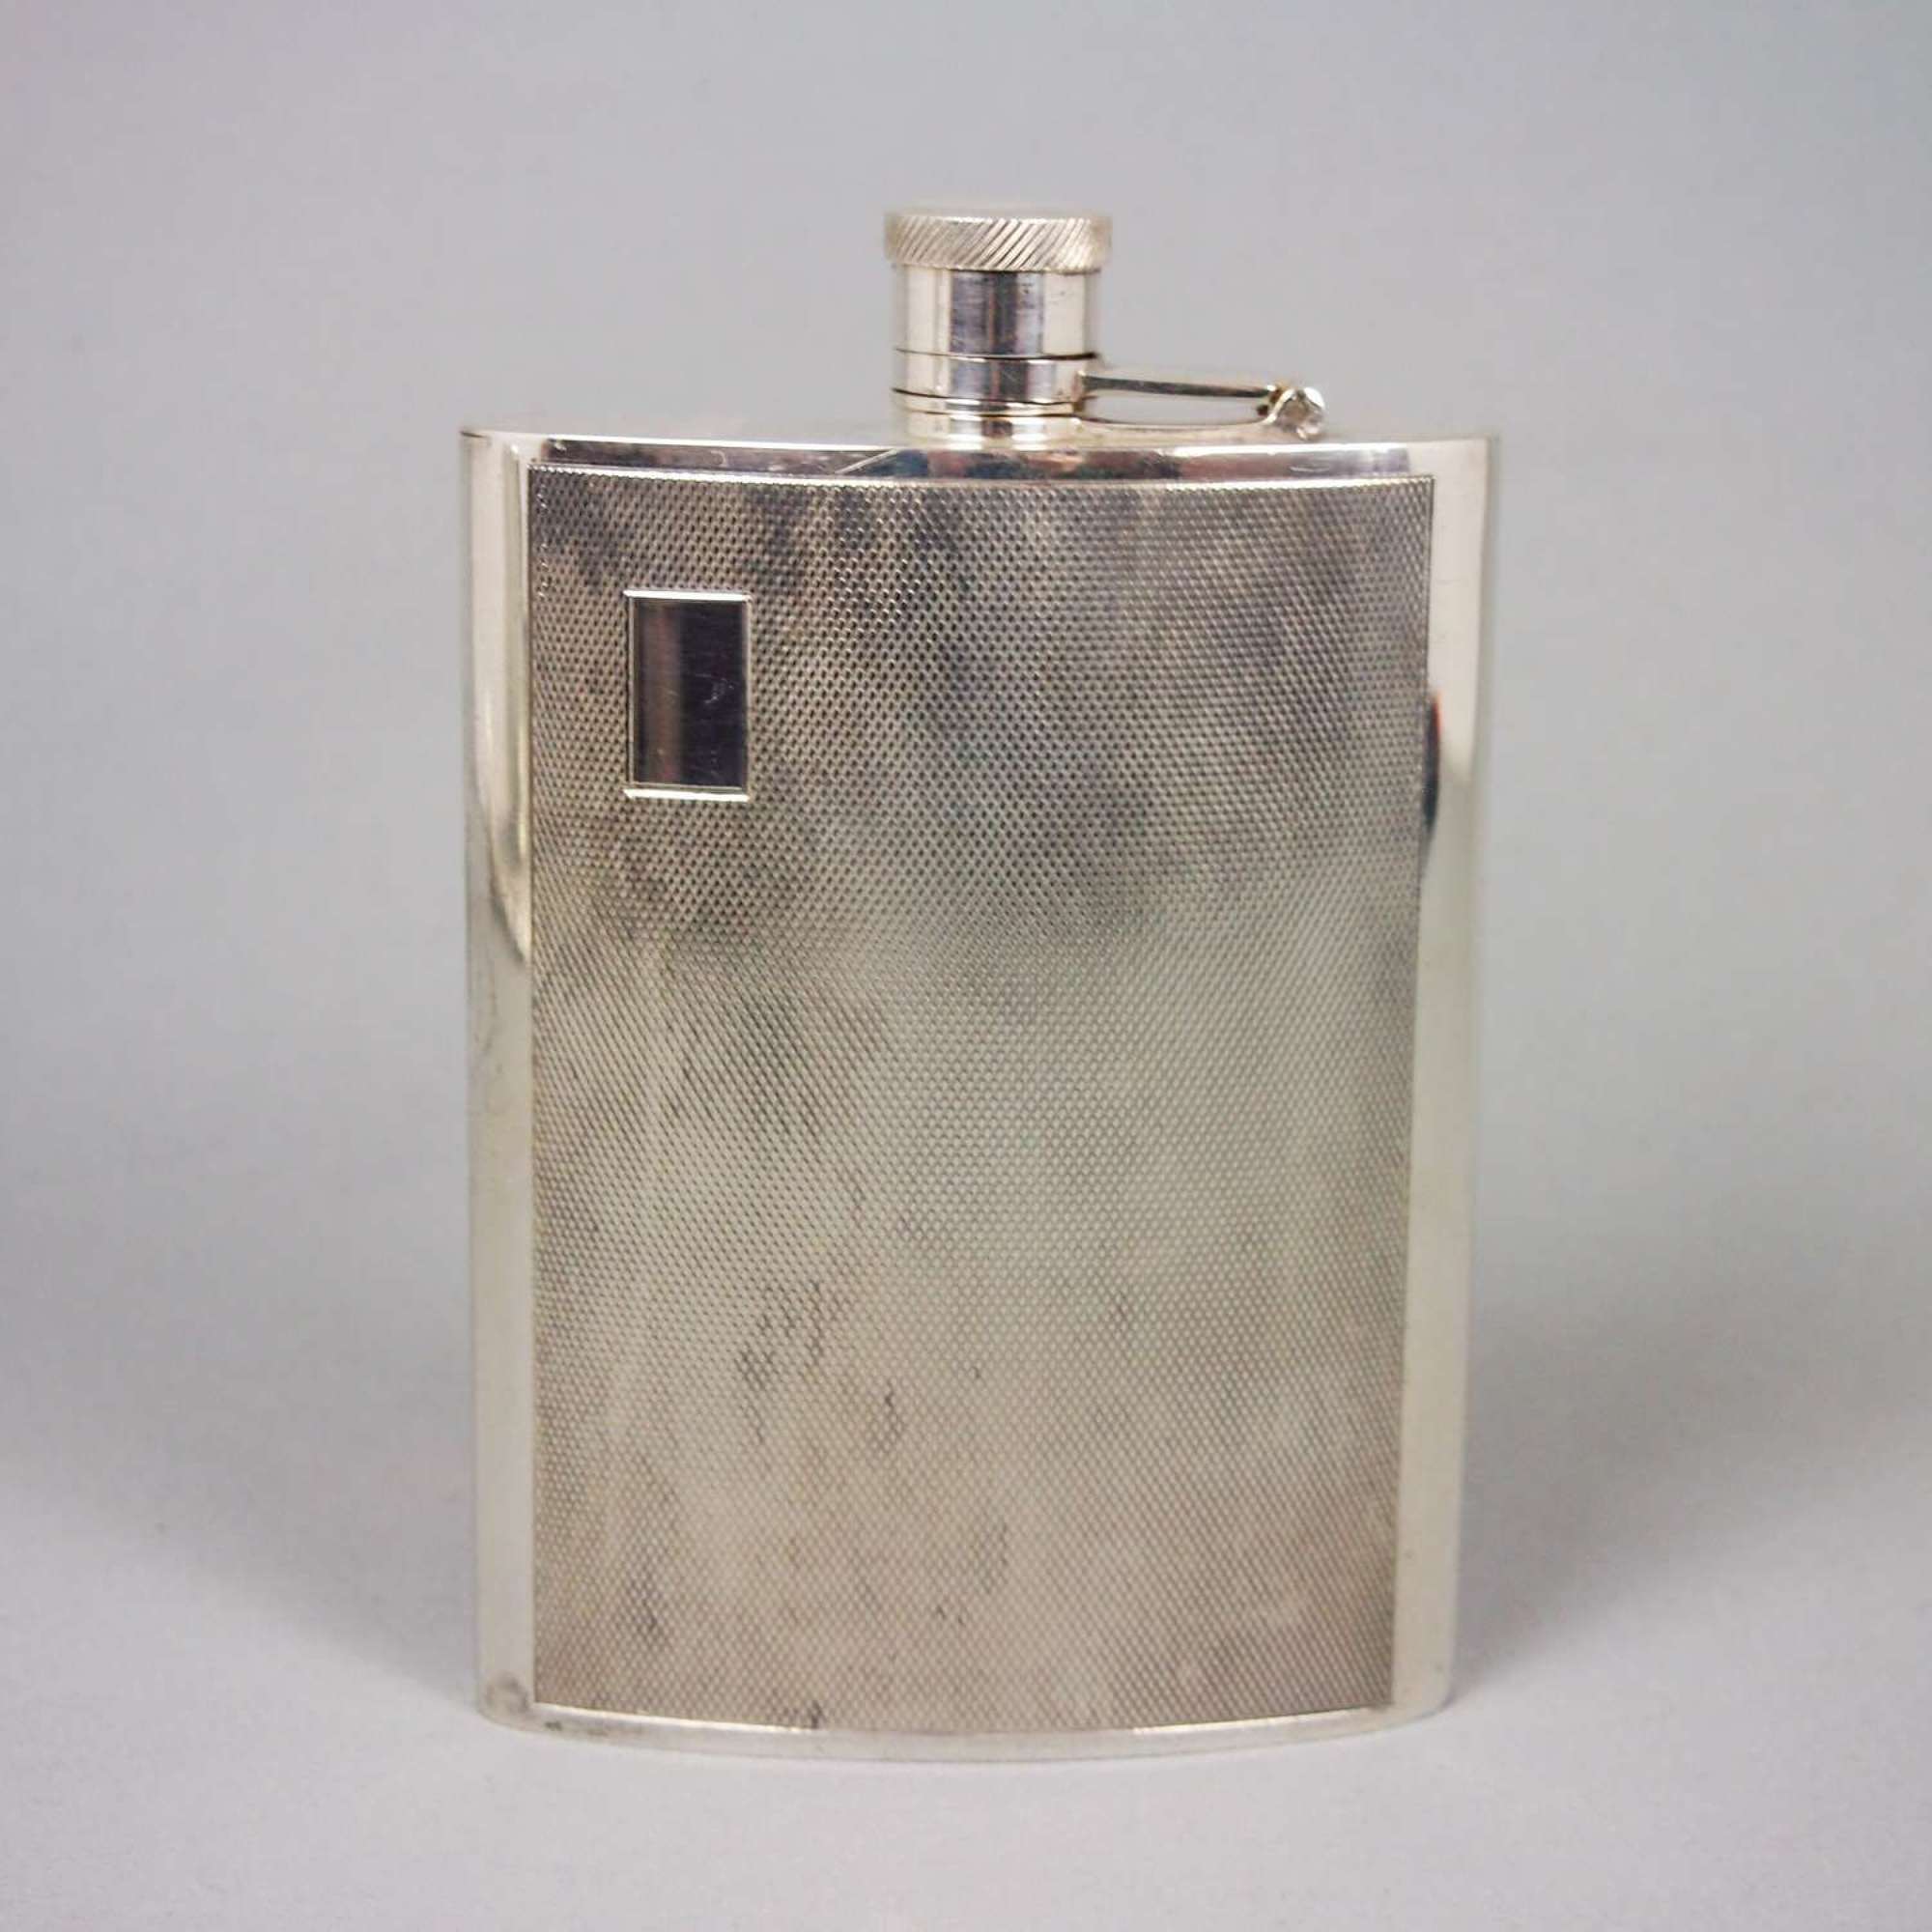 Vintage engine turned silver plated whisky flask. W8503